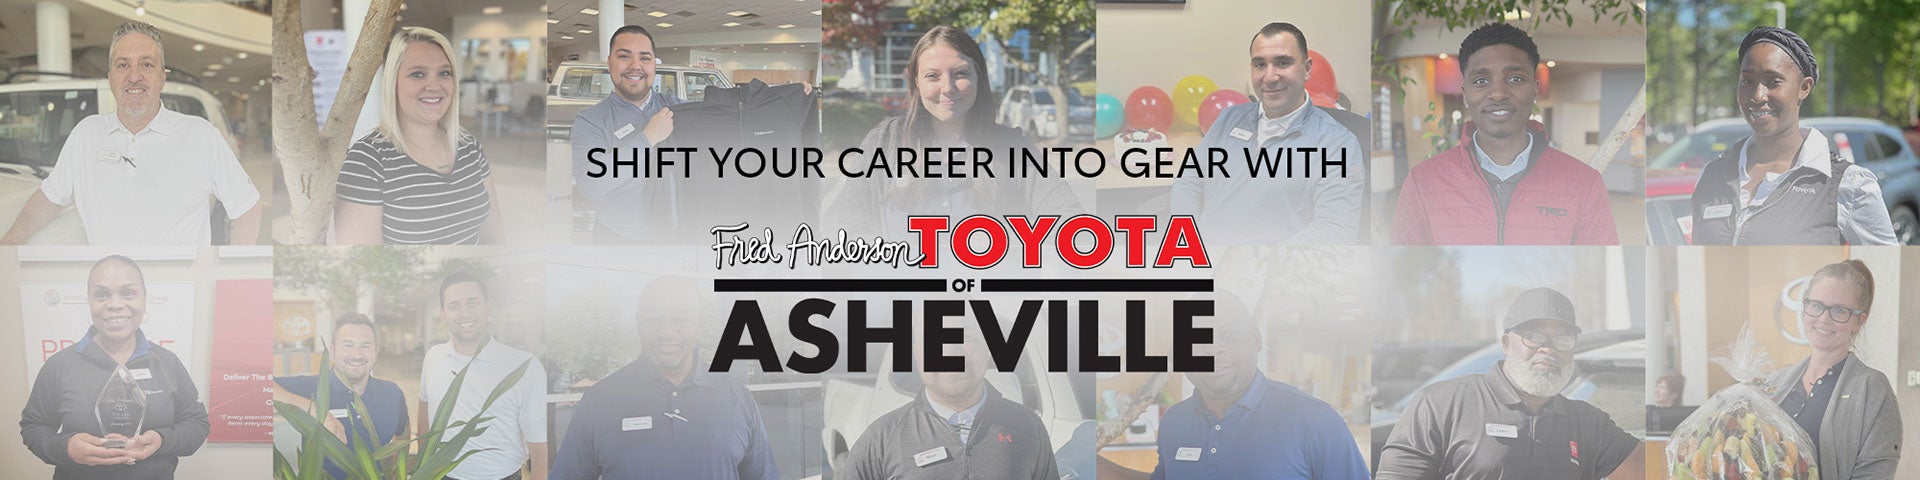 Fred Anderson Toyota of Asheville Careers